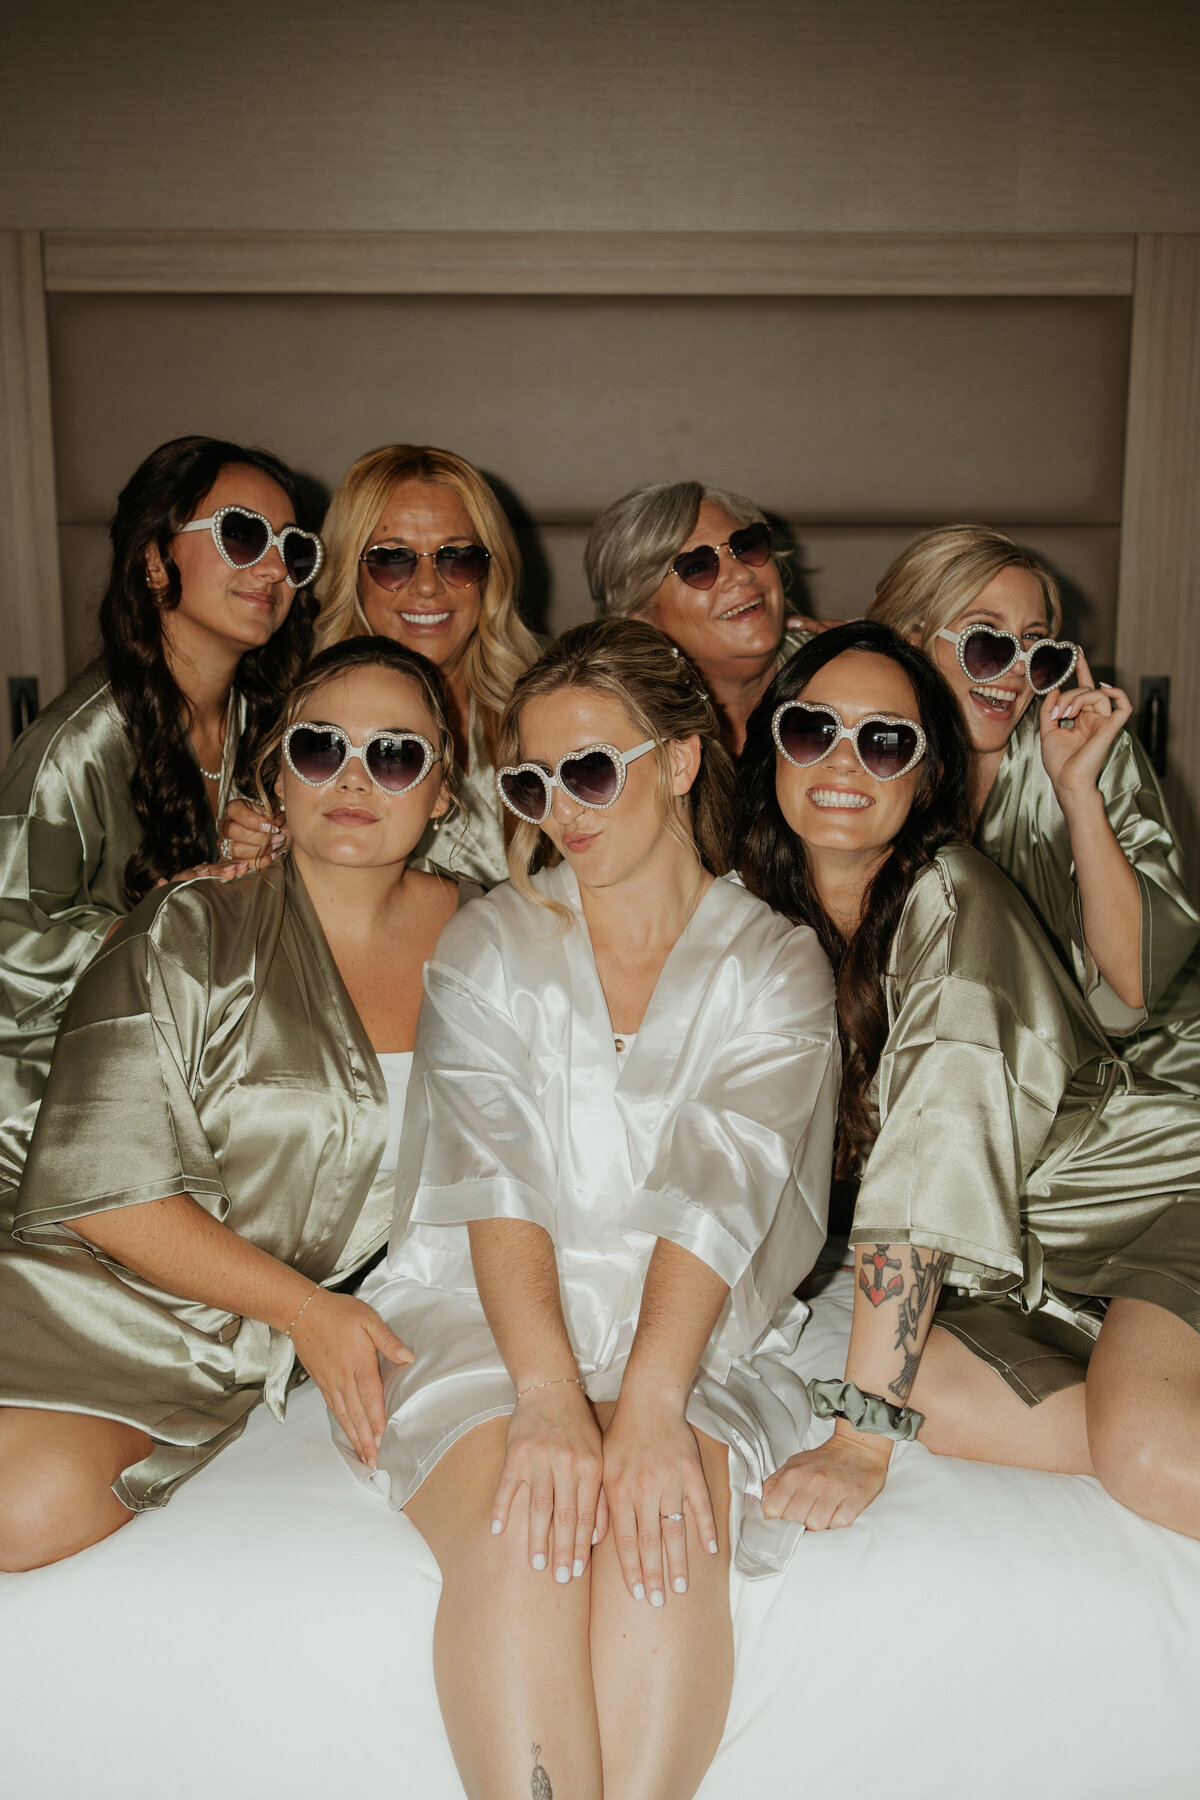 Bride and bridesmaids in matching silk robes and heart-shaped sunglasses share a candid and joyful moment on the wedding day.